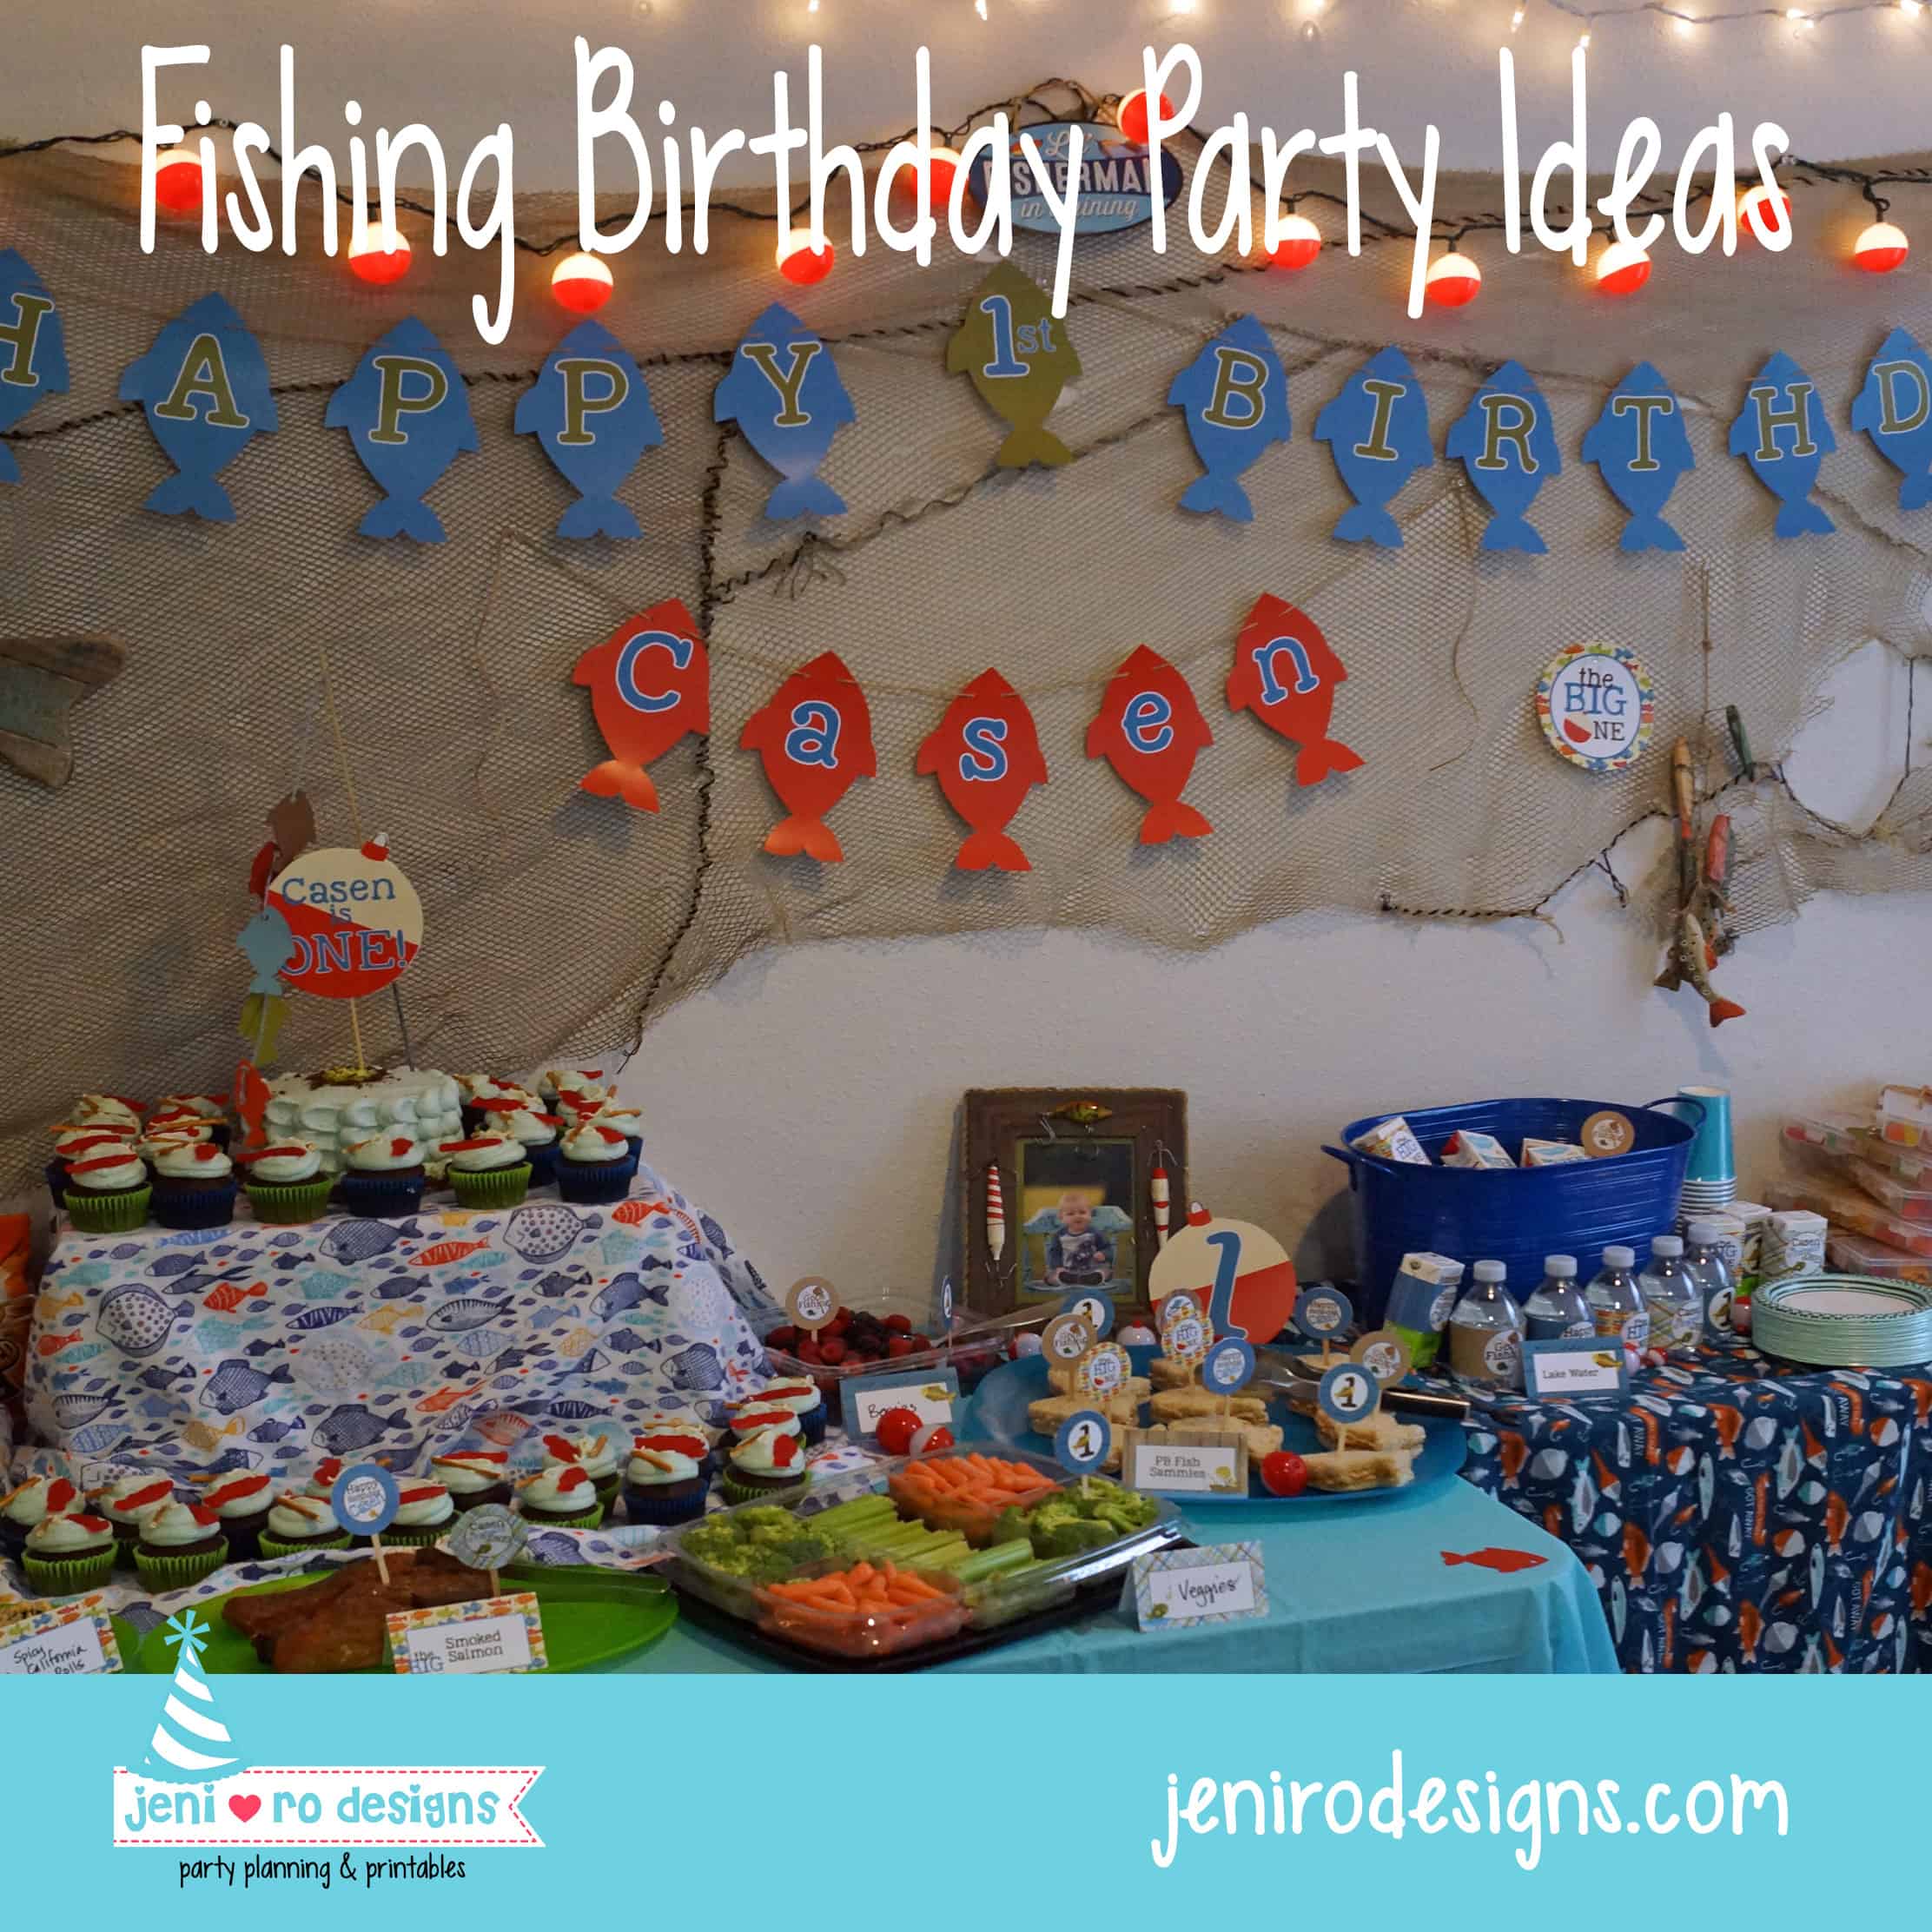 Fishing birthday party ideas for your little angler's next